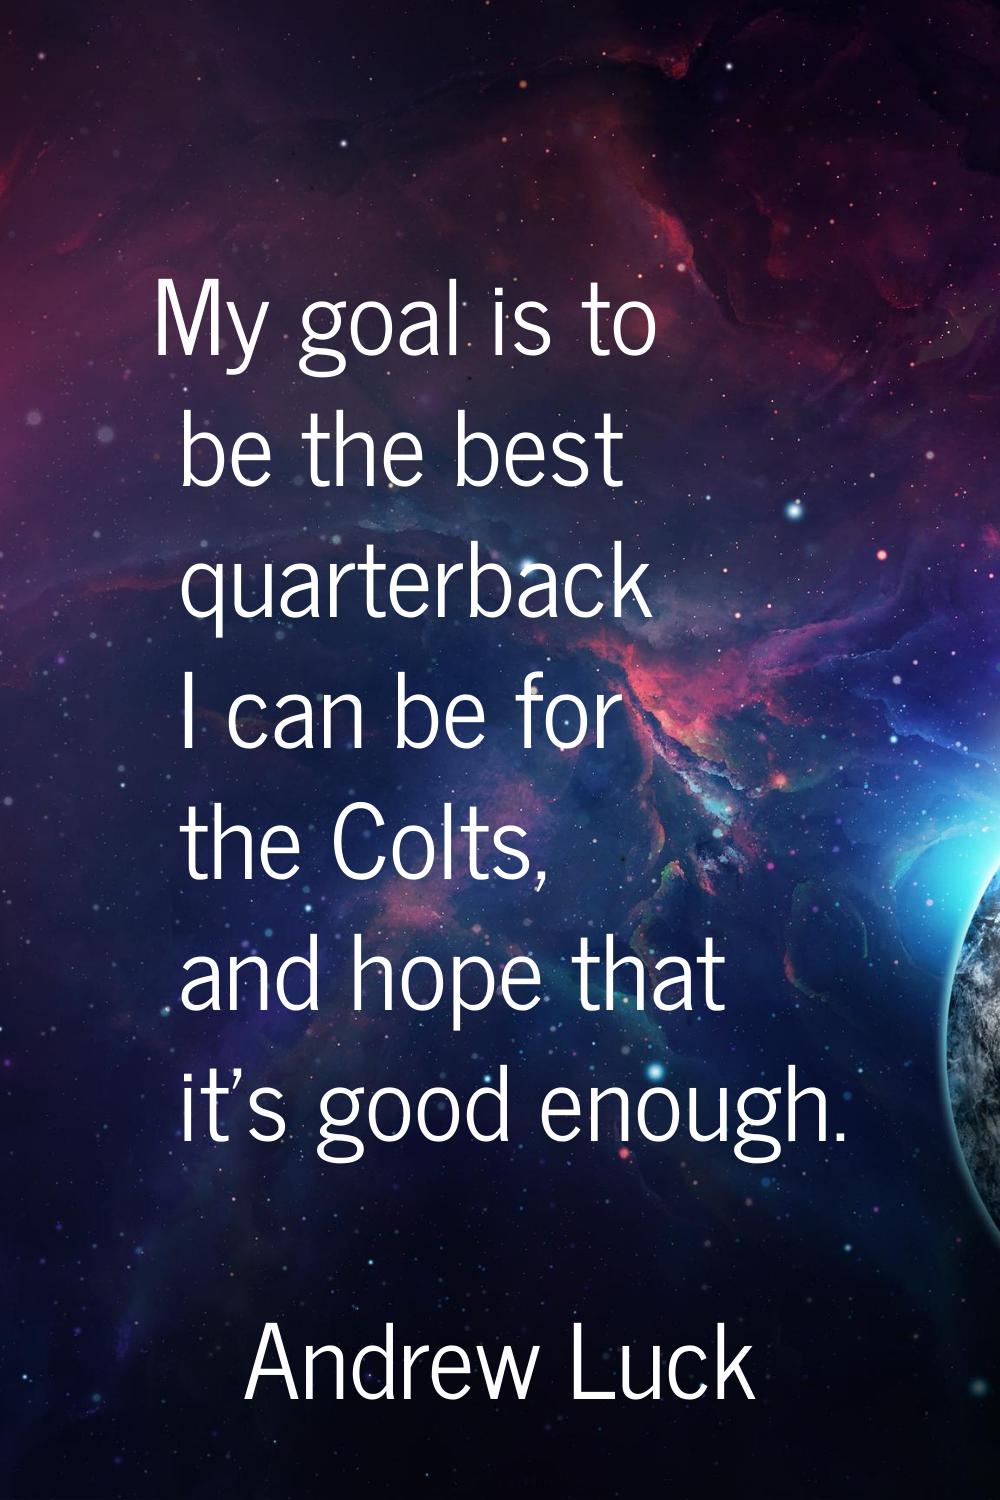 My goal is to be the best quarterback I can be for the Colts, and hope that it's good enough.